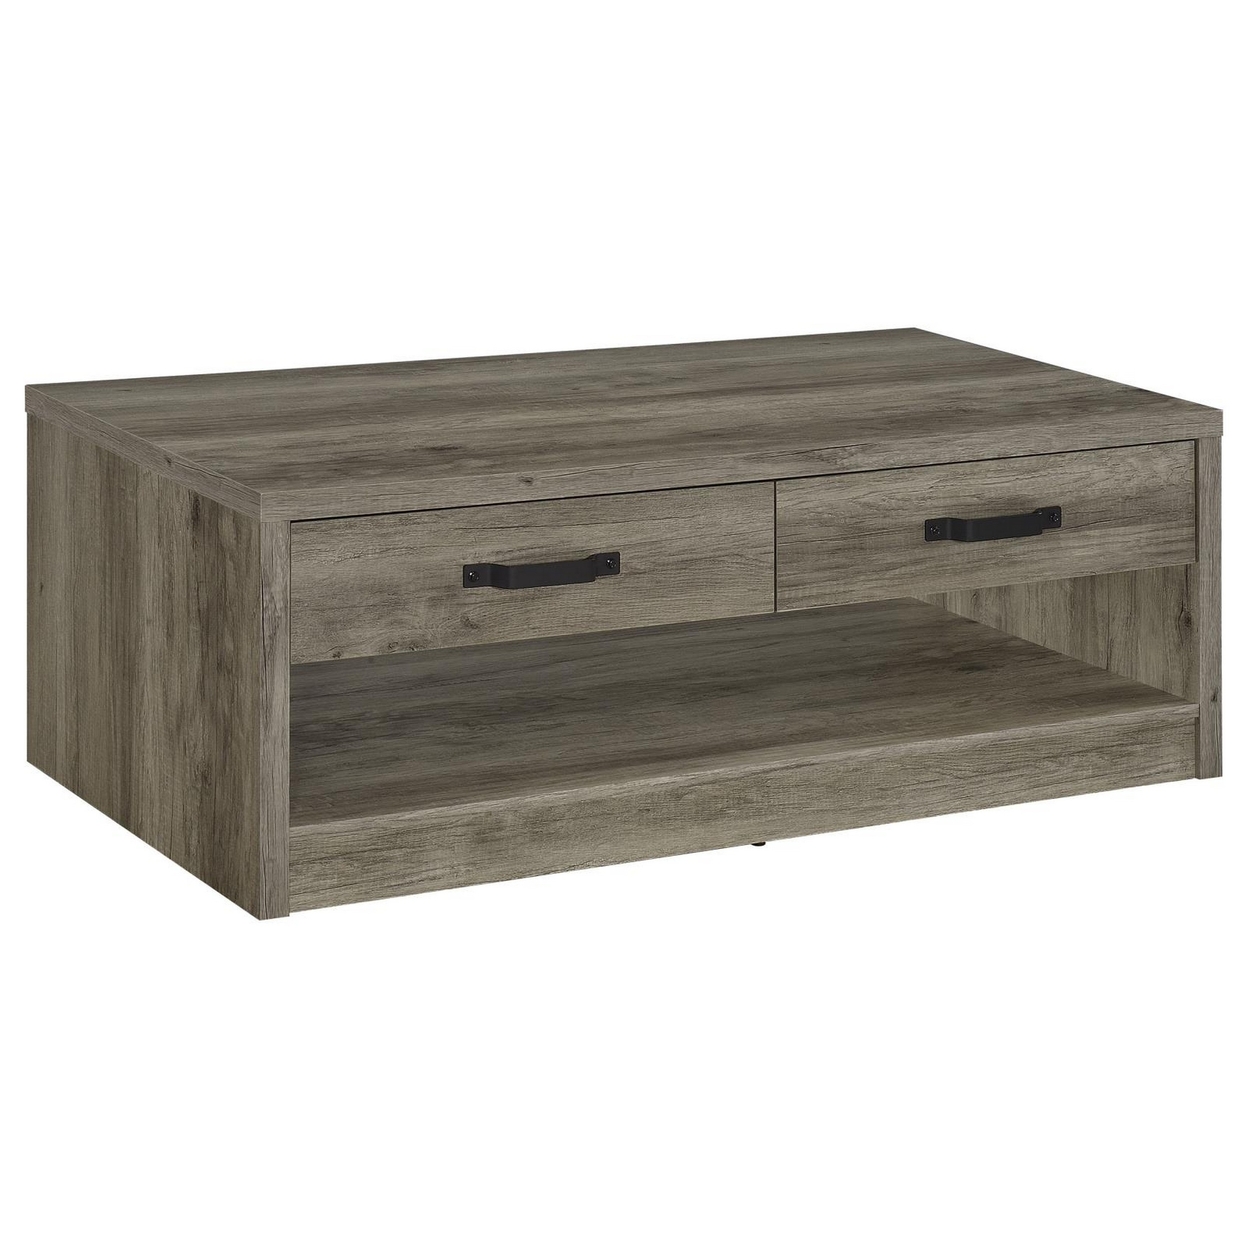 Lix 47 Inch Coffee Table With 1 Drawer, MDF, Rustic Weathered Gray Finish -Saltoro Sherpi